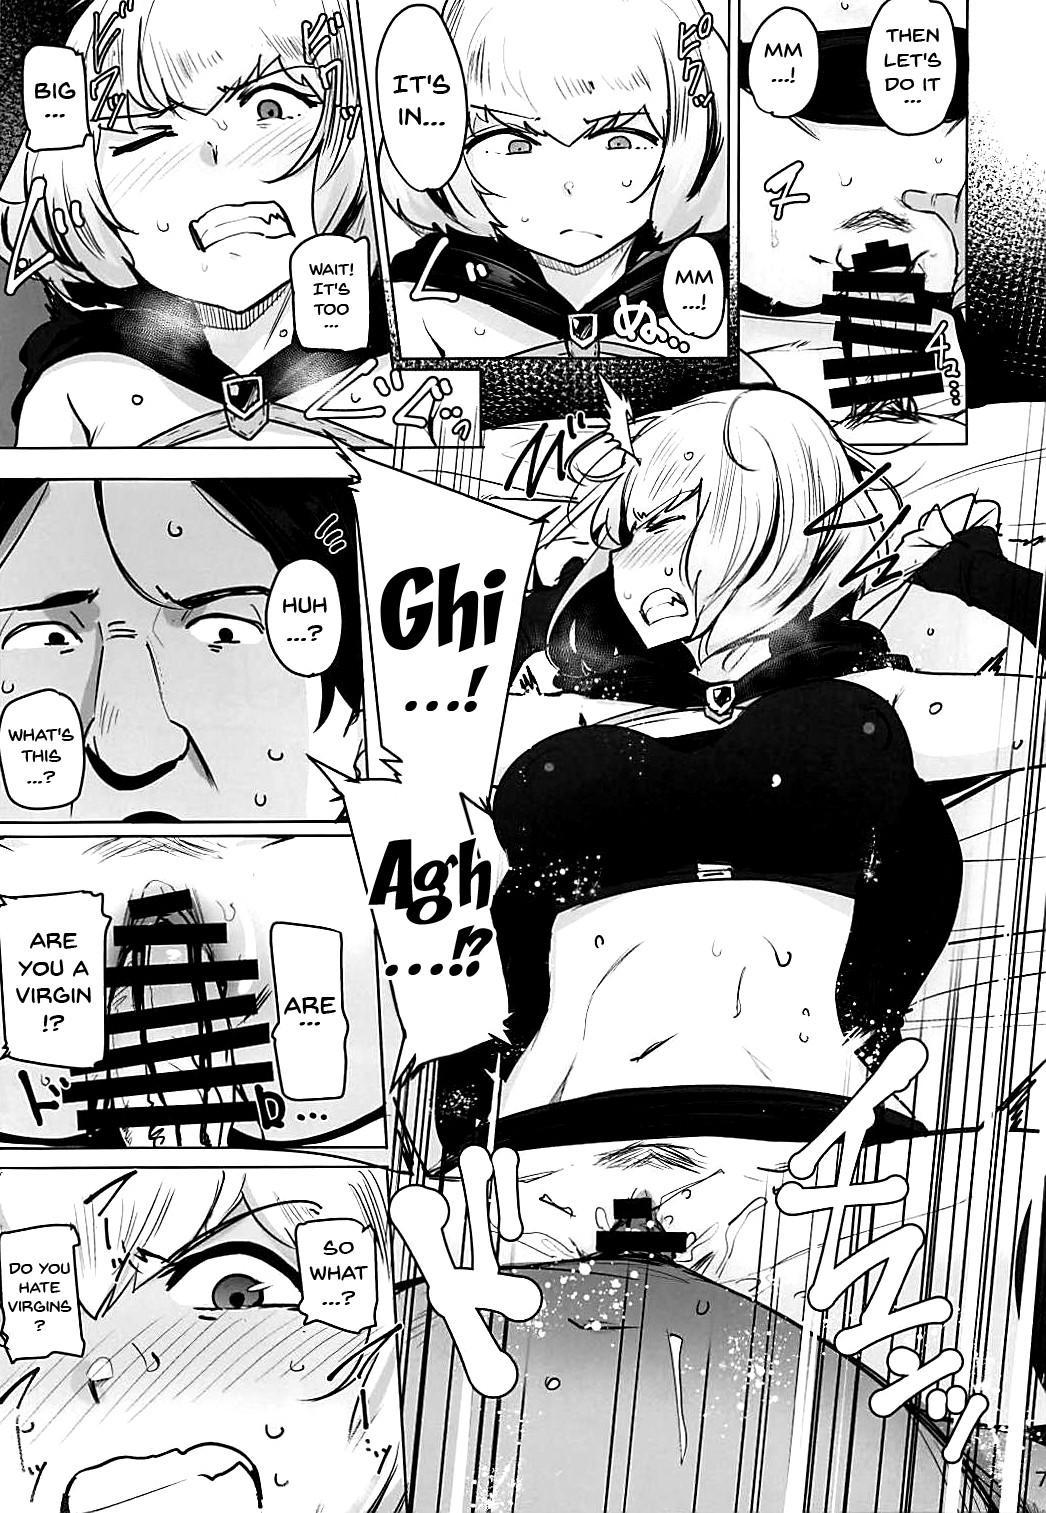 Peituda OVER HOLE - Overlord Blowjob Contest - Page 7